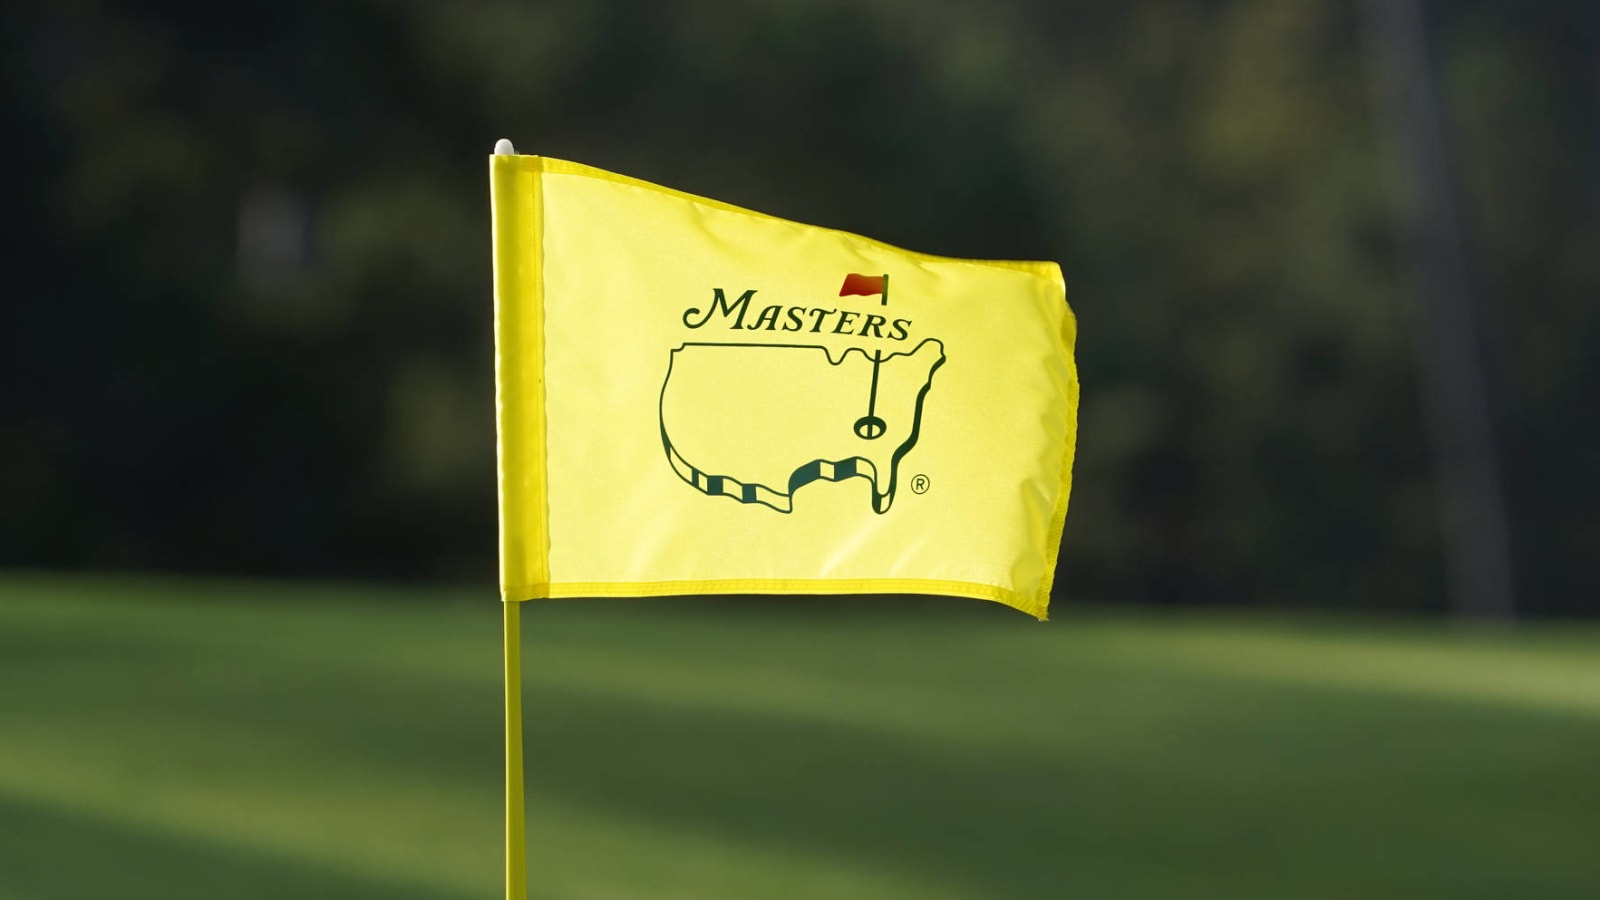 Augusta National planning for limited attendance at Masters